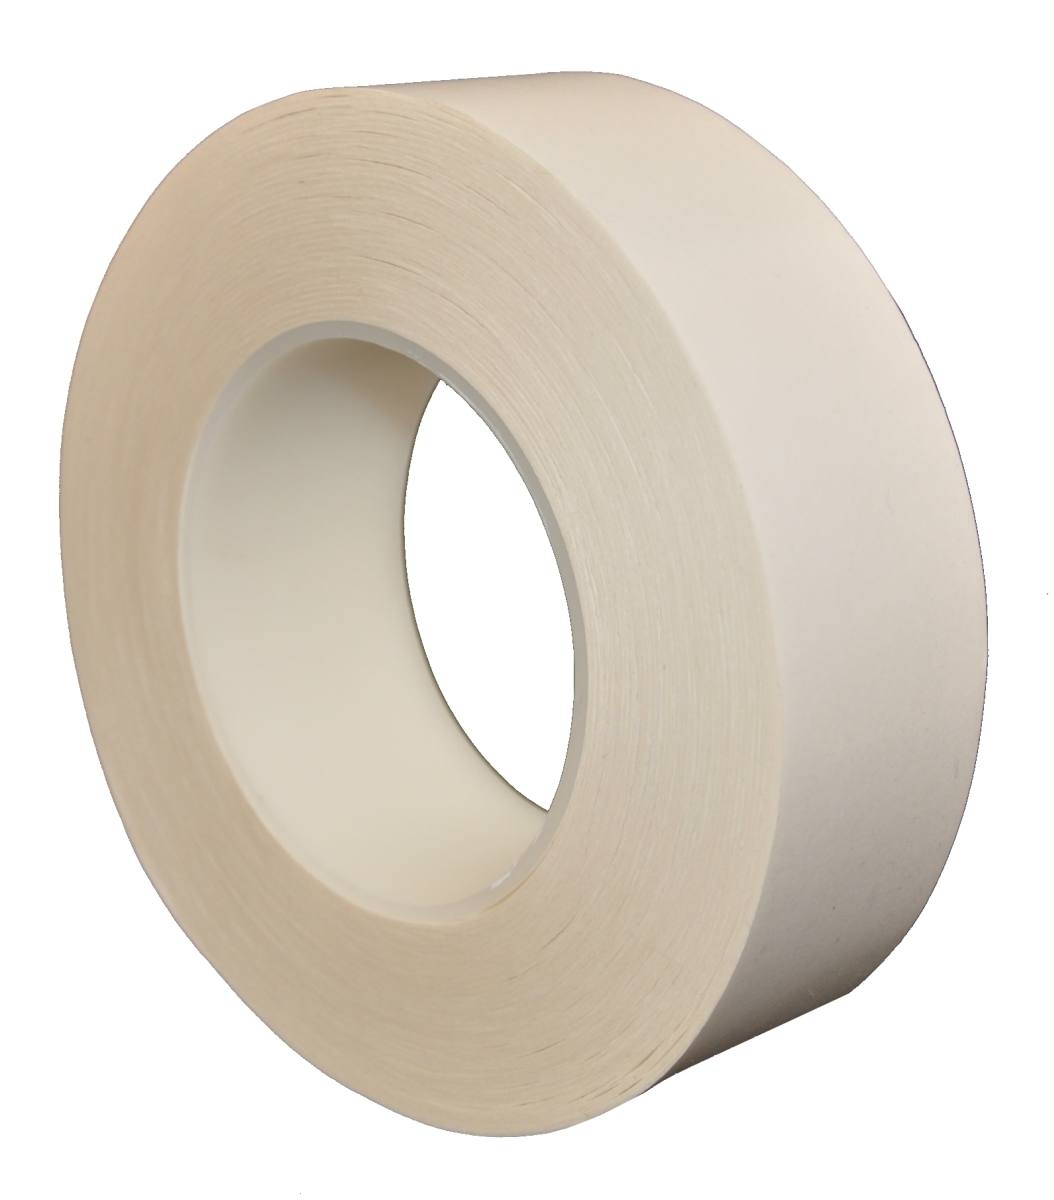 SKS silicone paper release liner, 150mmx150m, coated with glassine on both sides, white